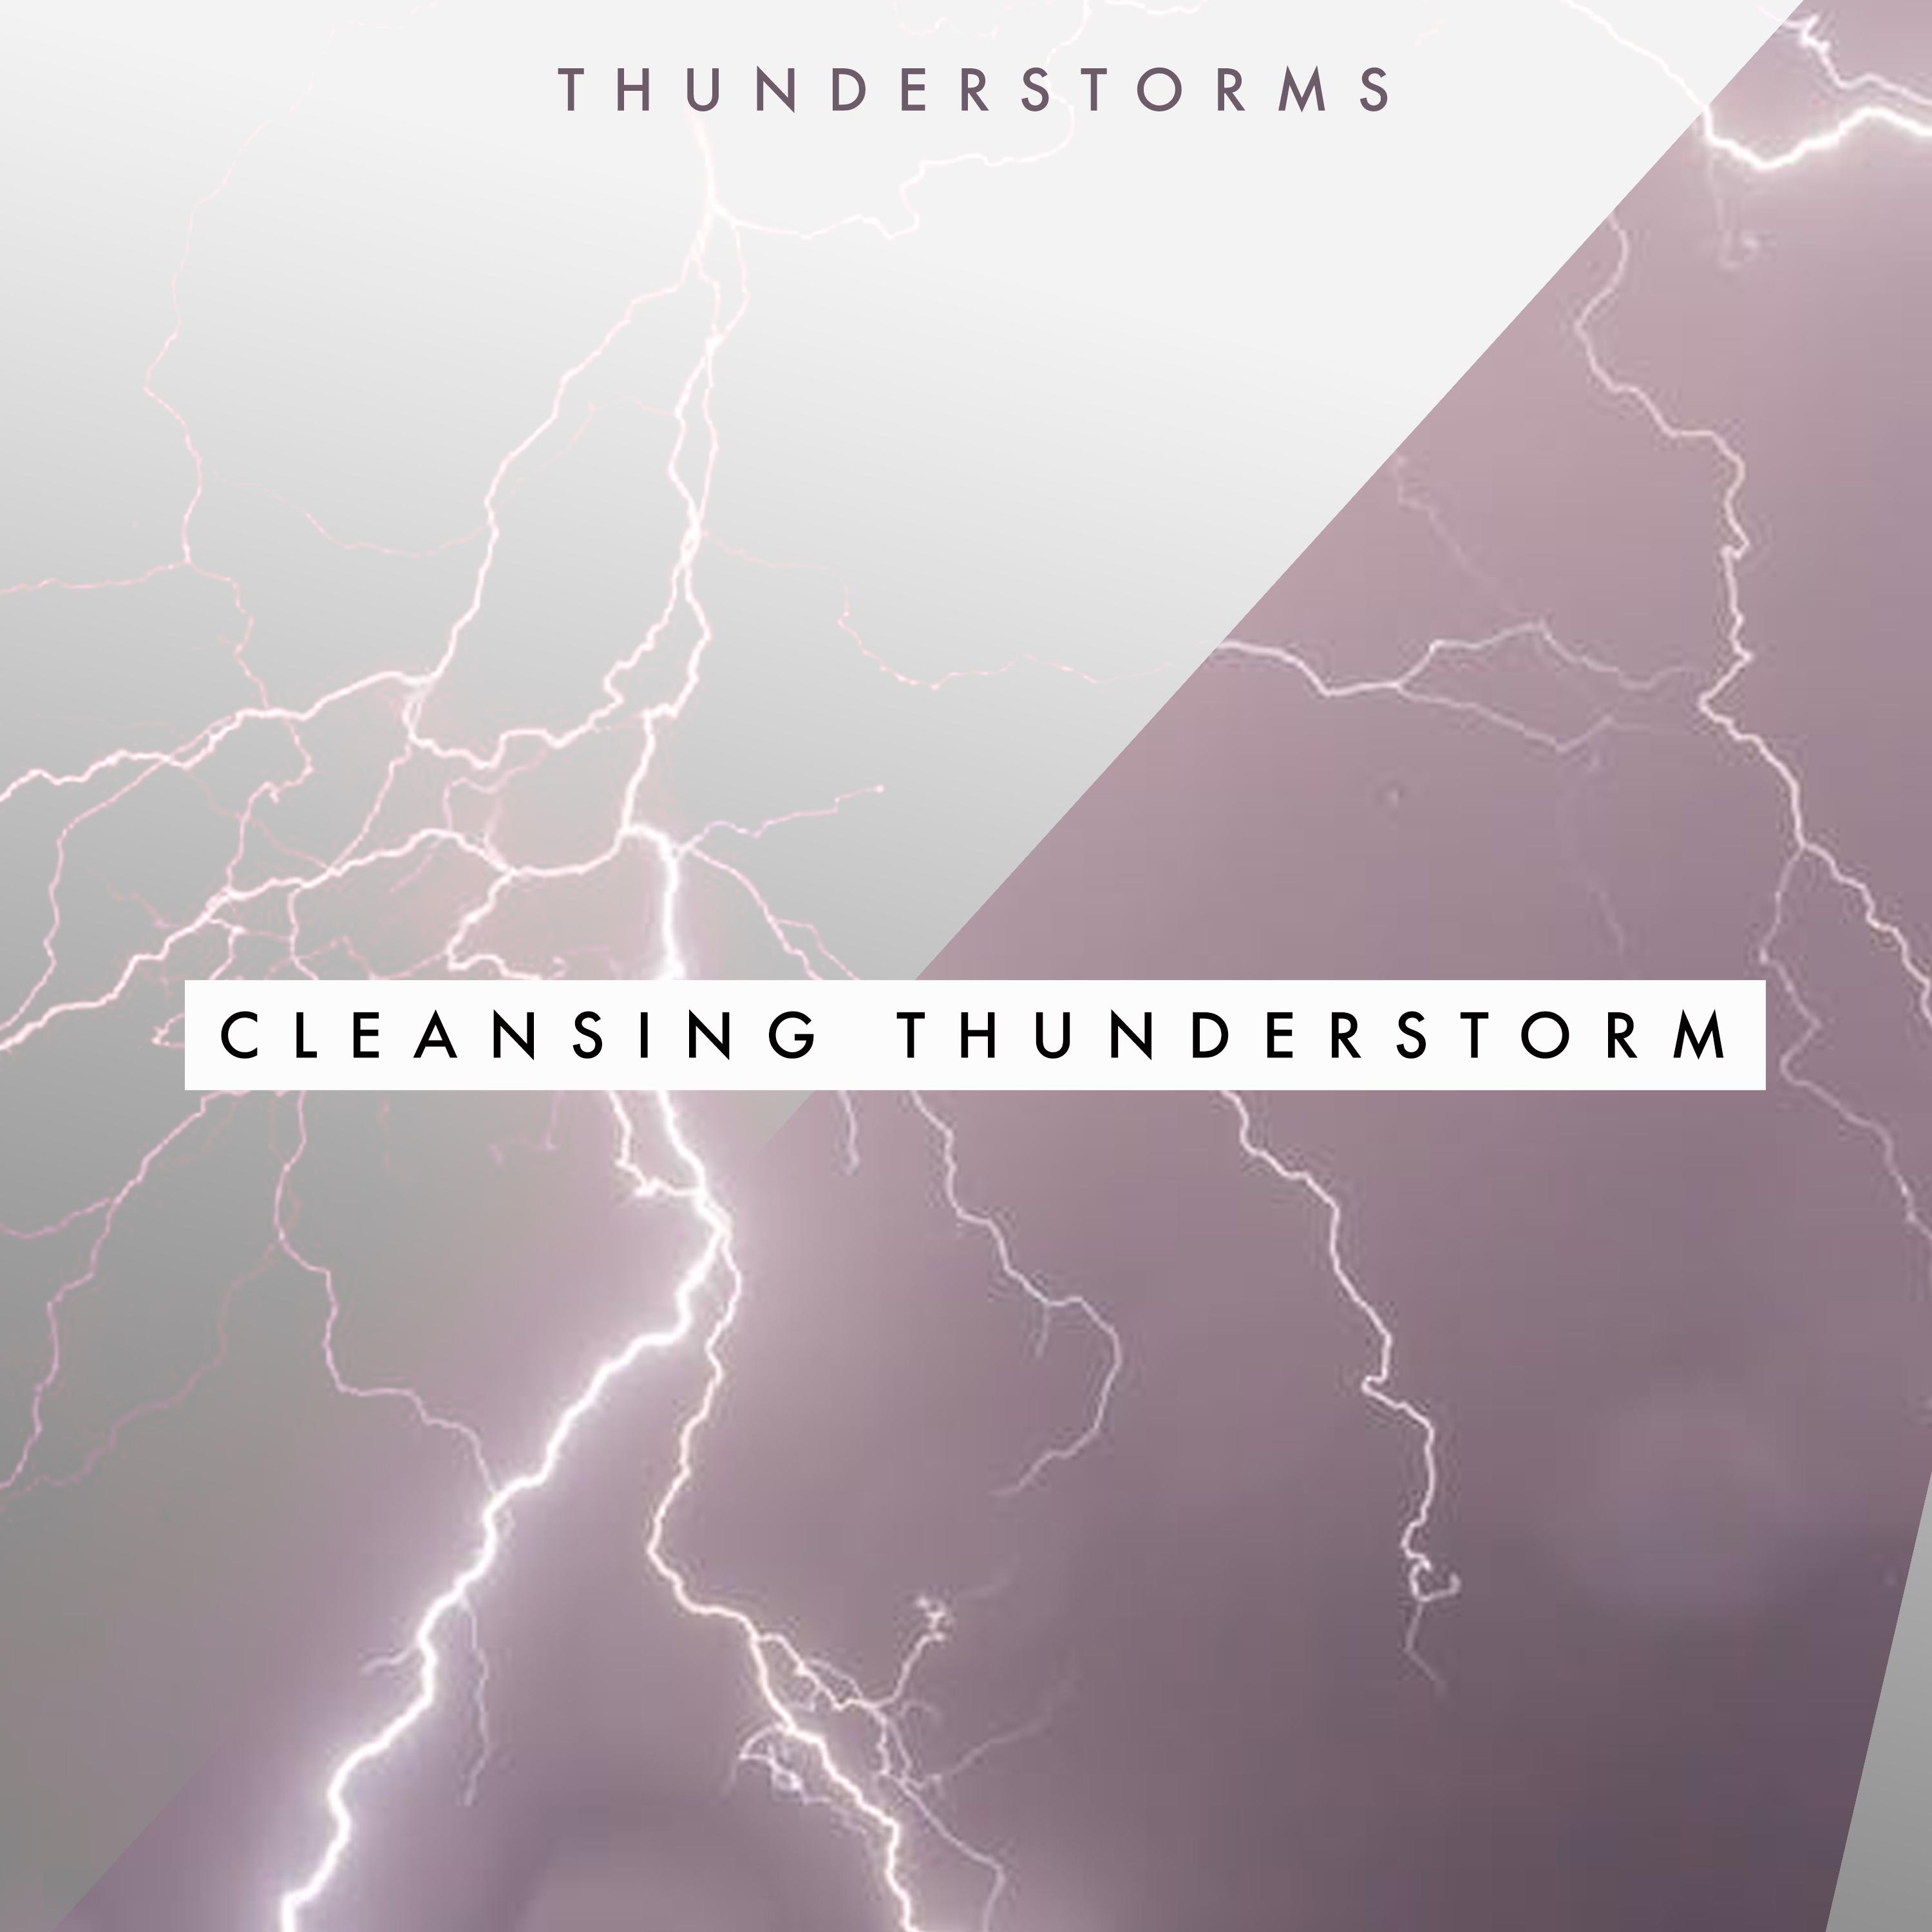 Cleansing Thunderstorm